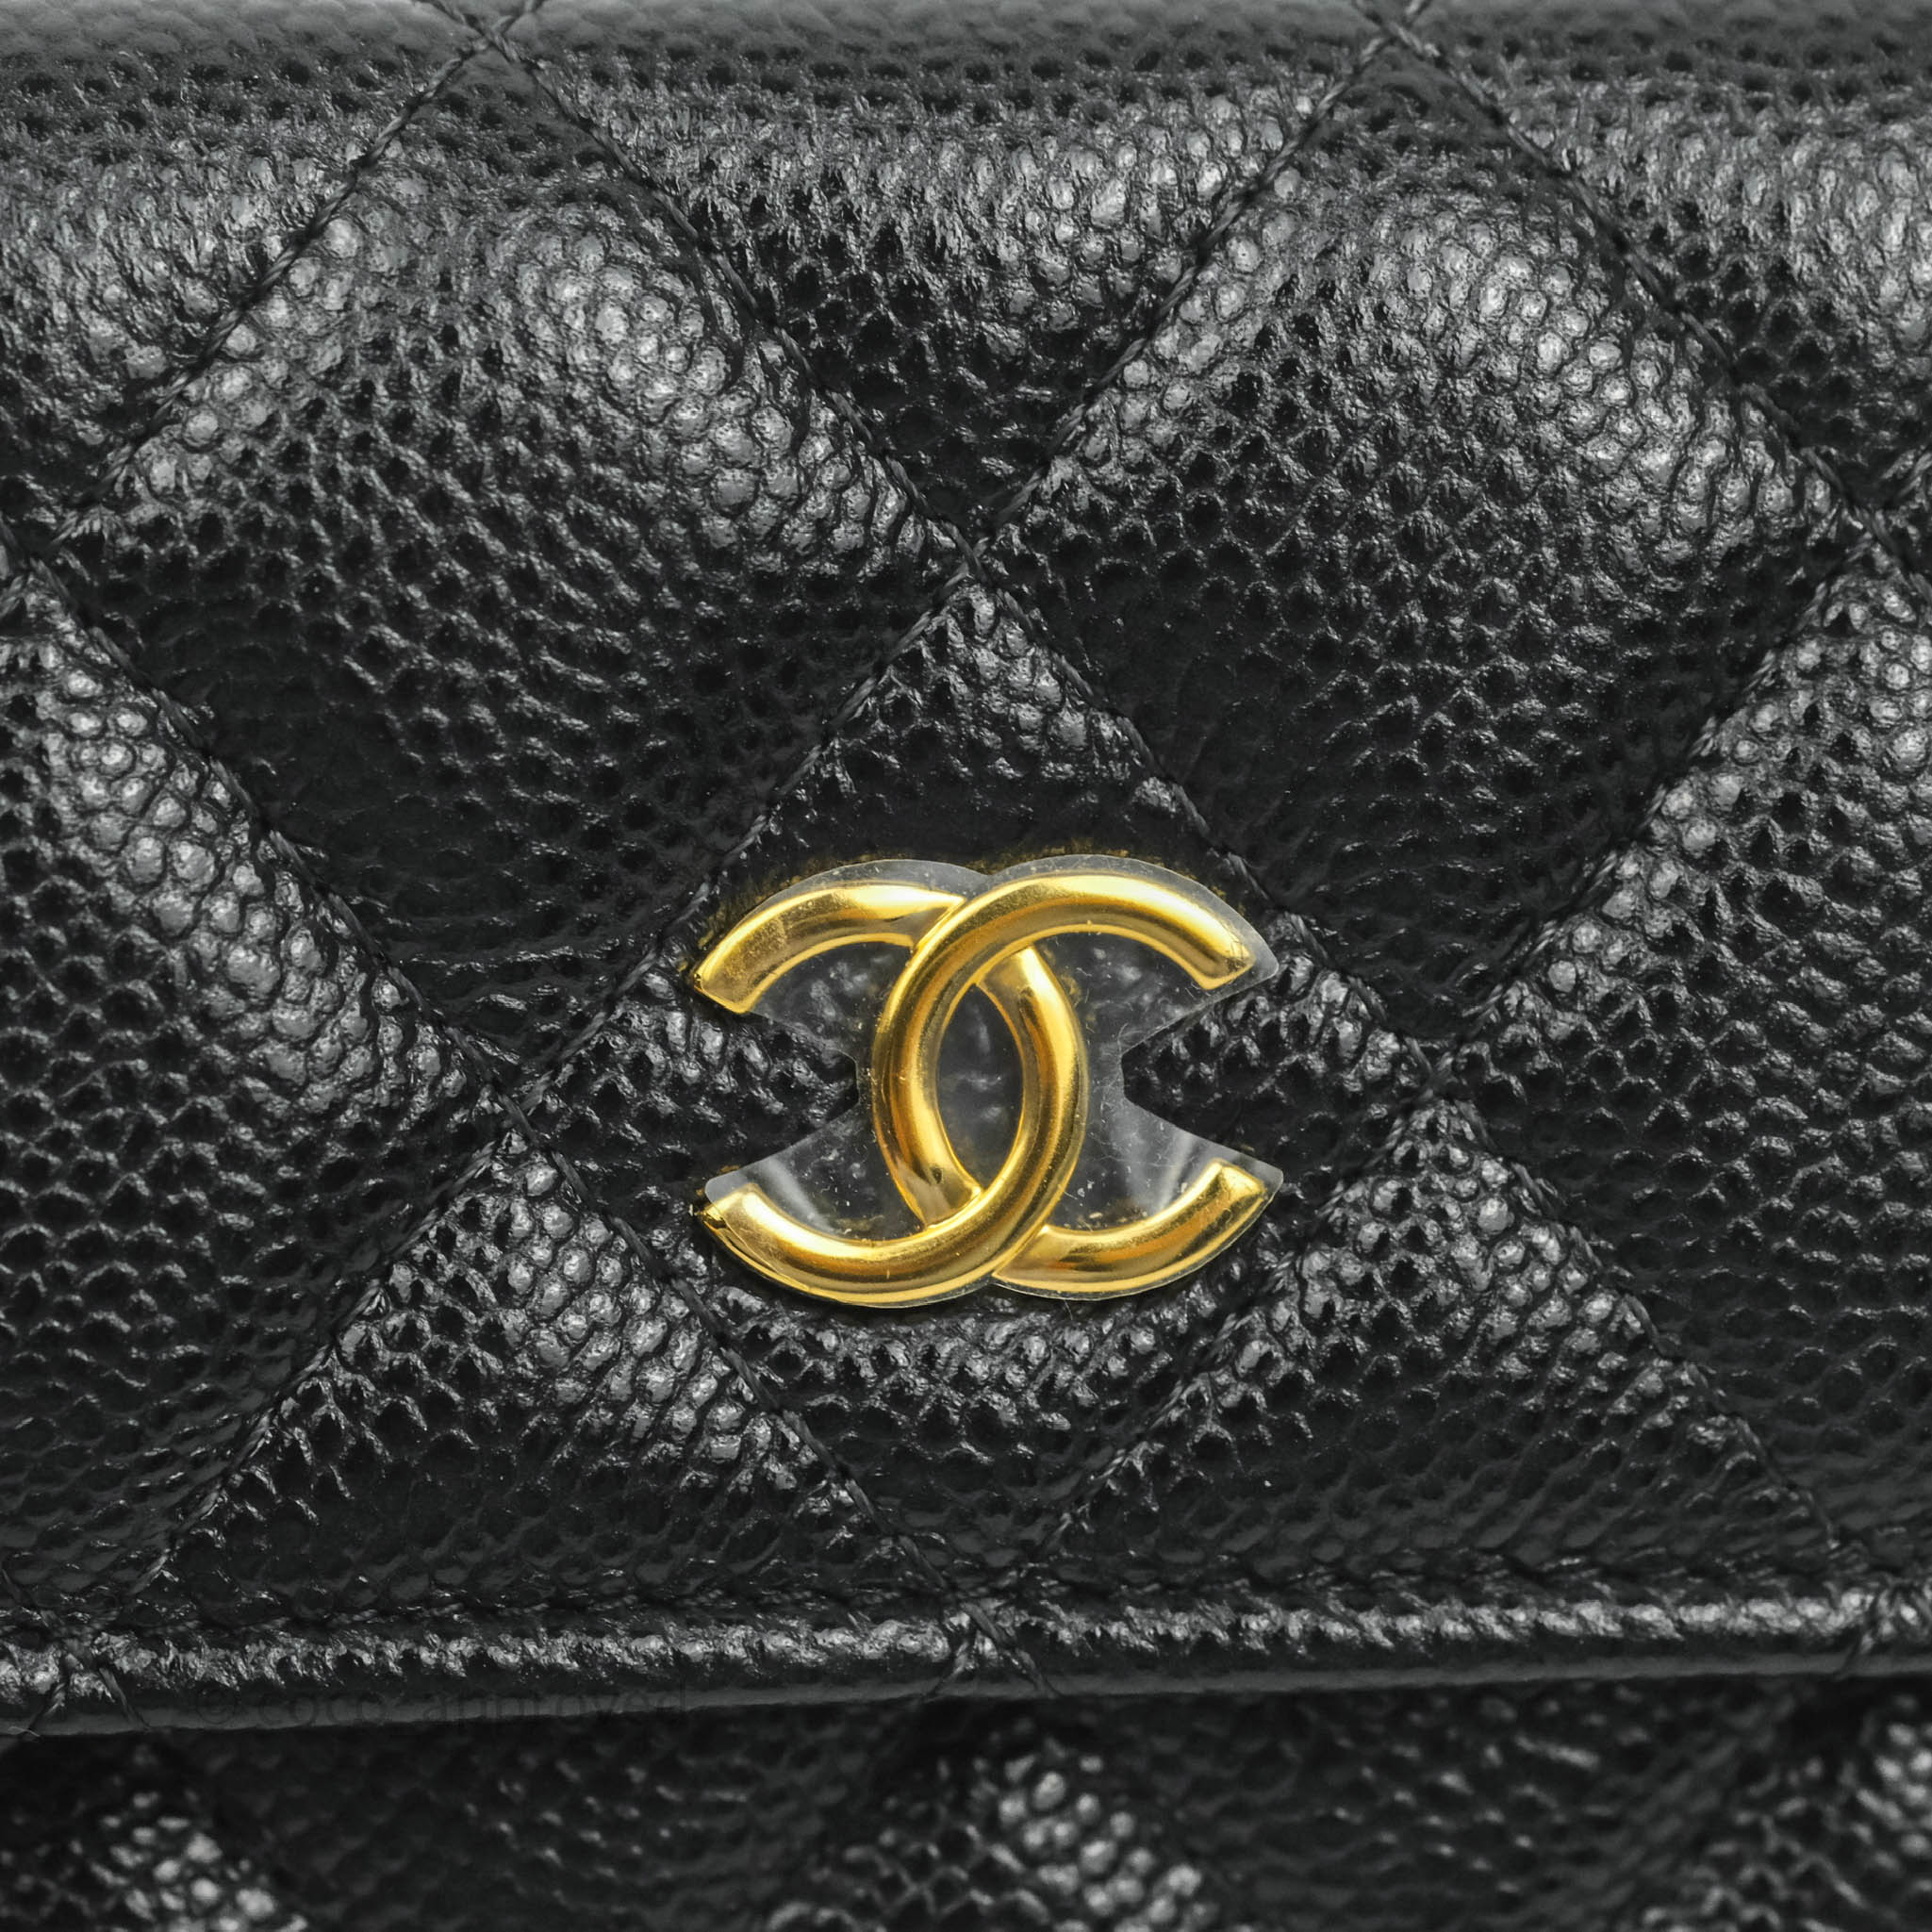 Chanel Miss Coco Clutch With Chain Quilted Black Caviar Gold Hardware – Coco  Approved Studio